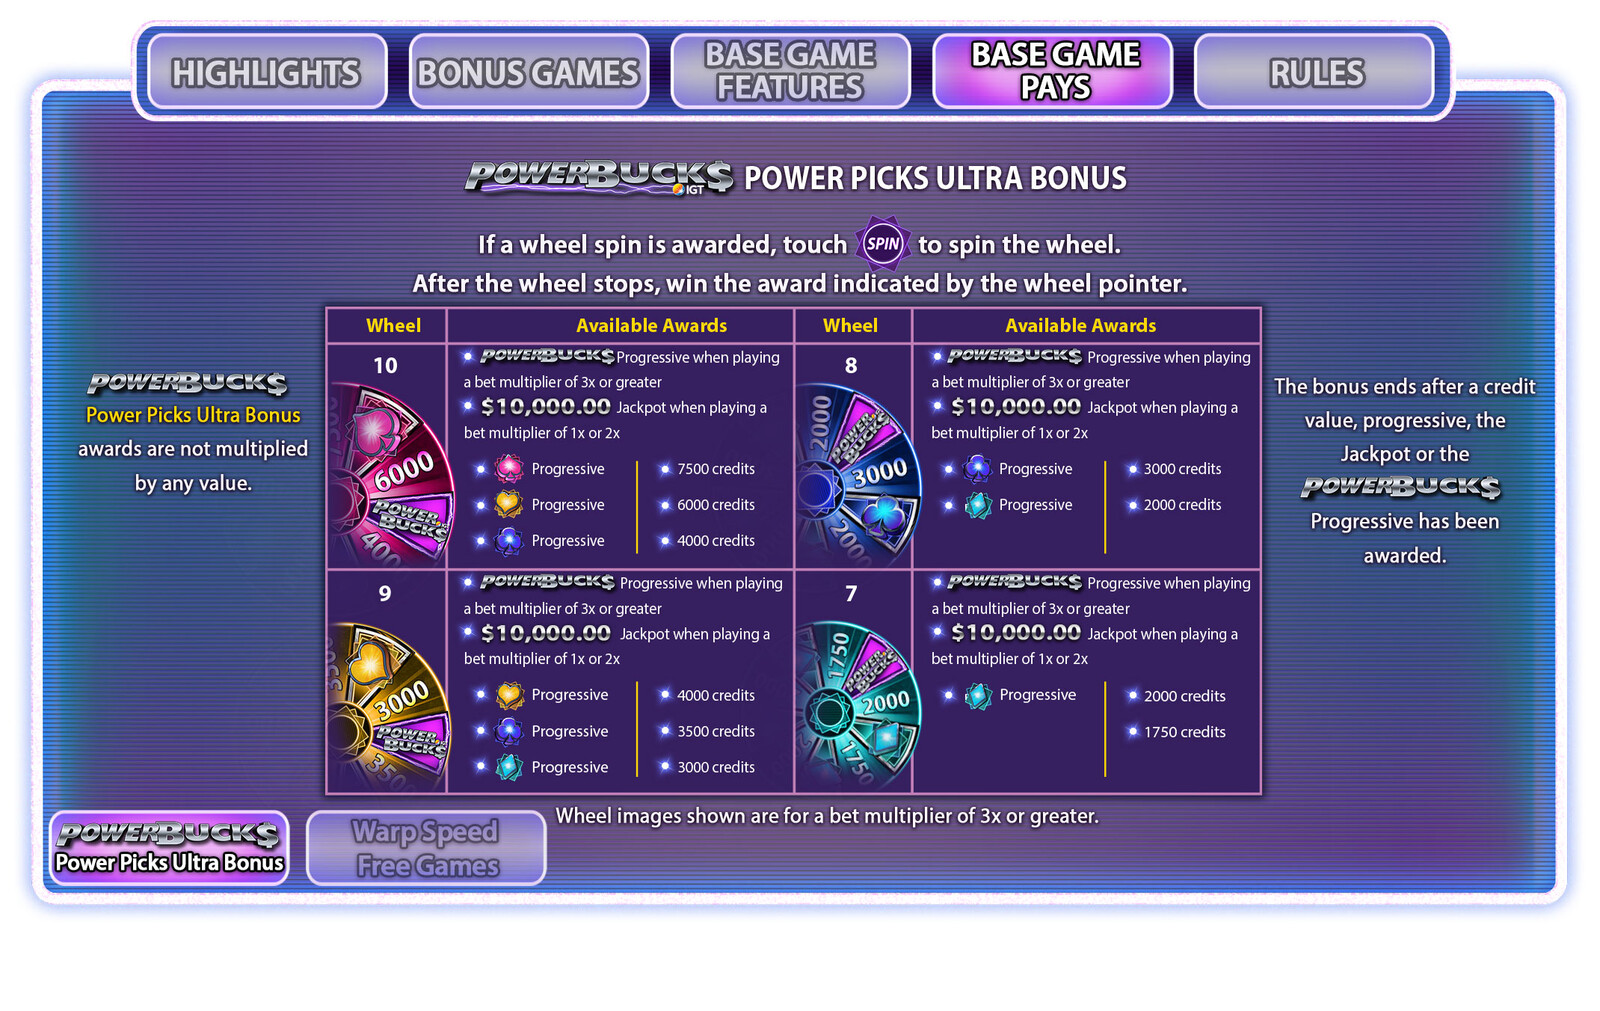 Design for Game Rules screens on the User Interface